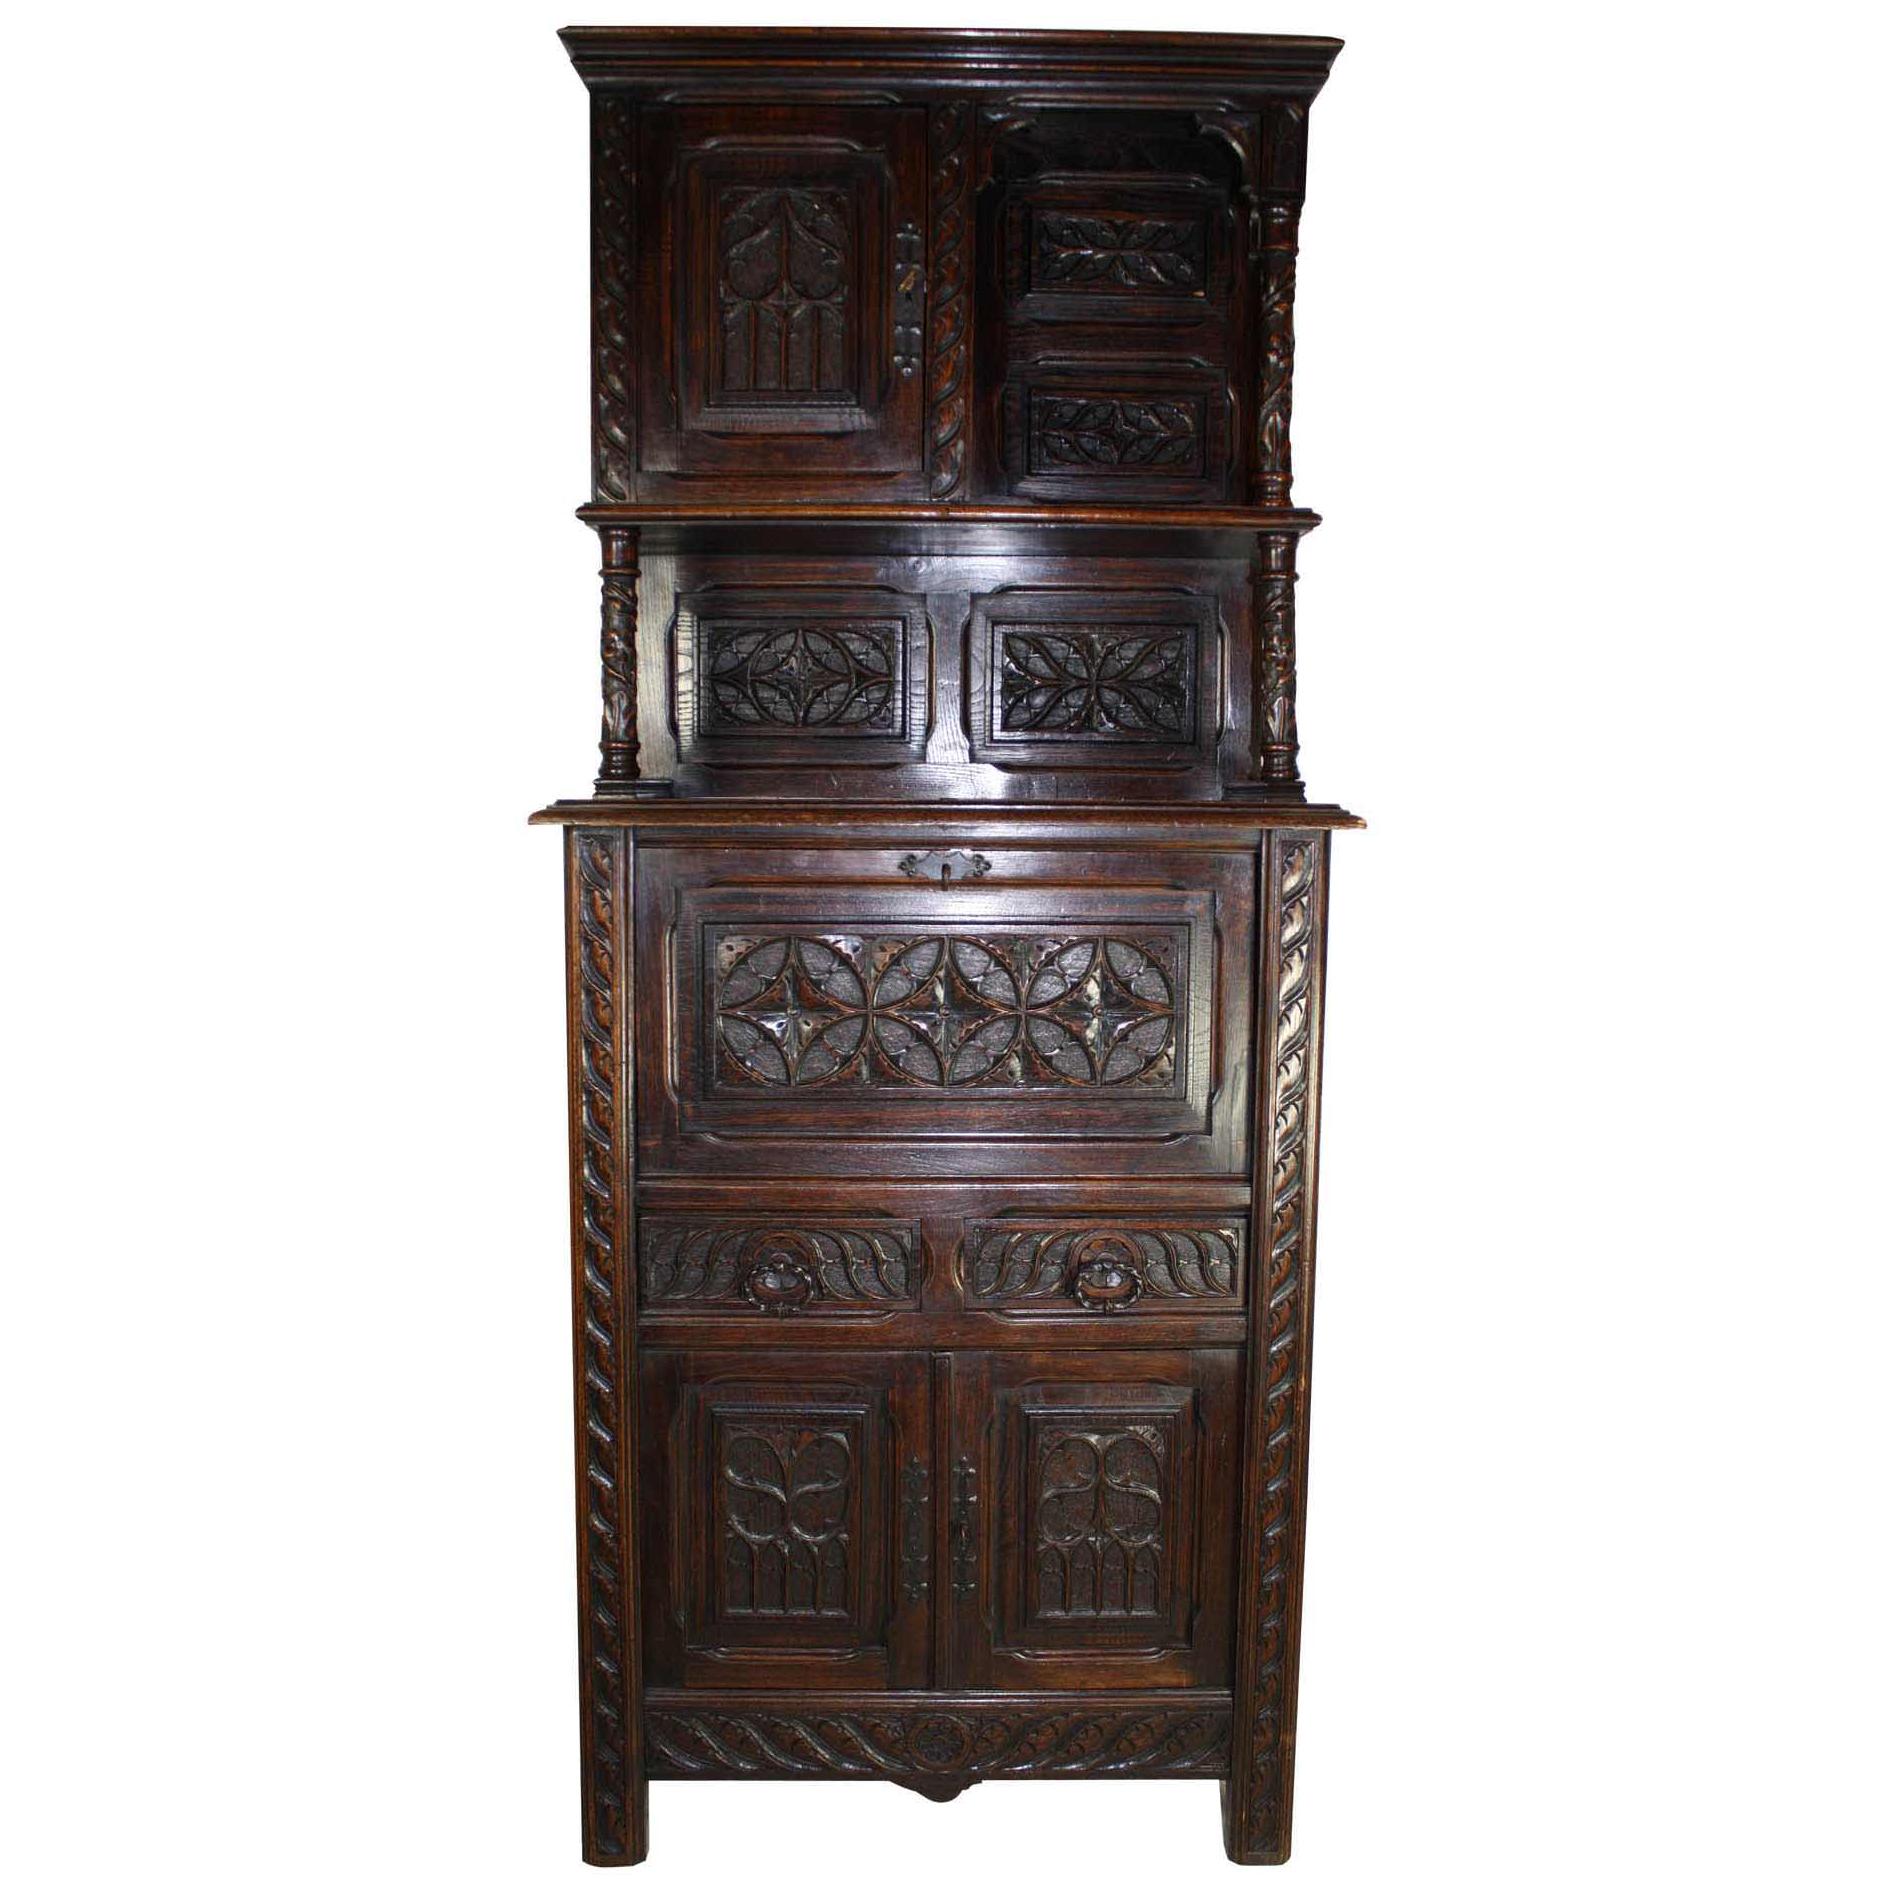 Gothic Revival Carved Walnut Cabinet, circa 1900